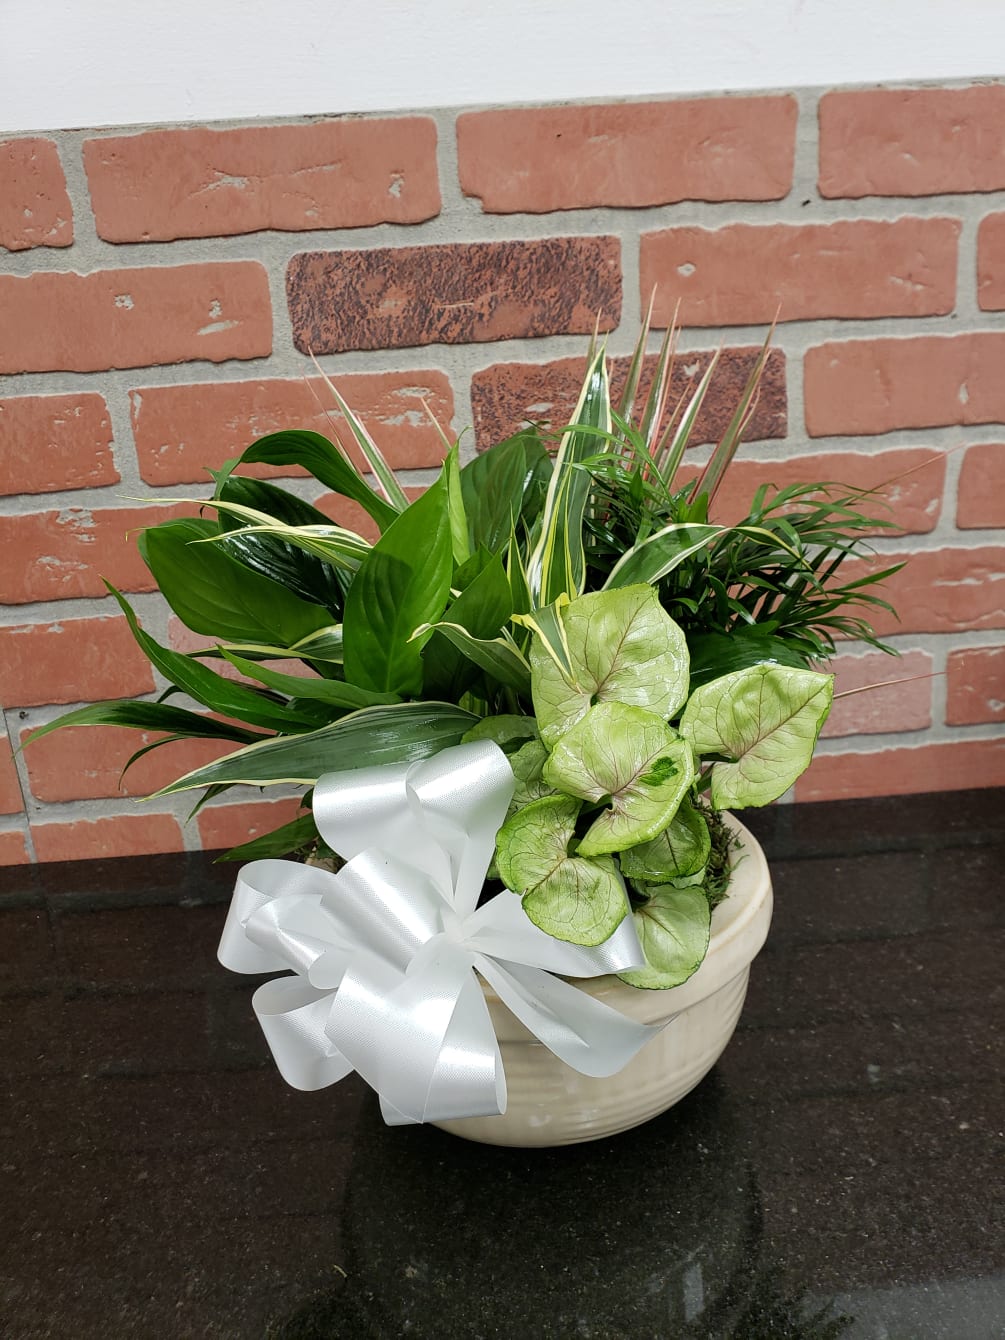 Ceramic Dish Garden is a nice 5 different plants. The plants and